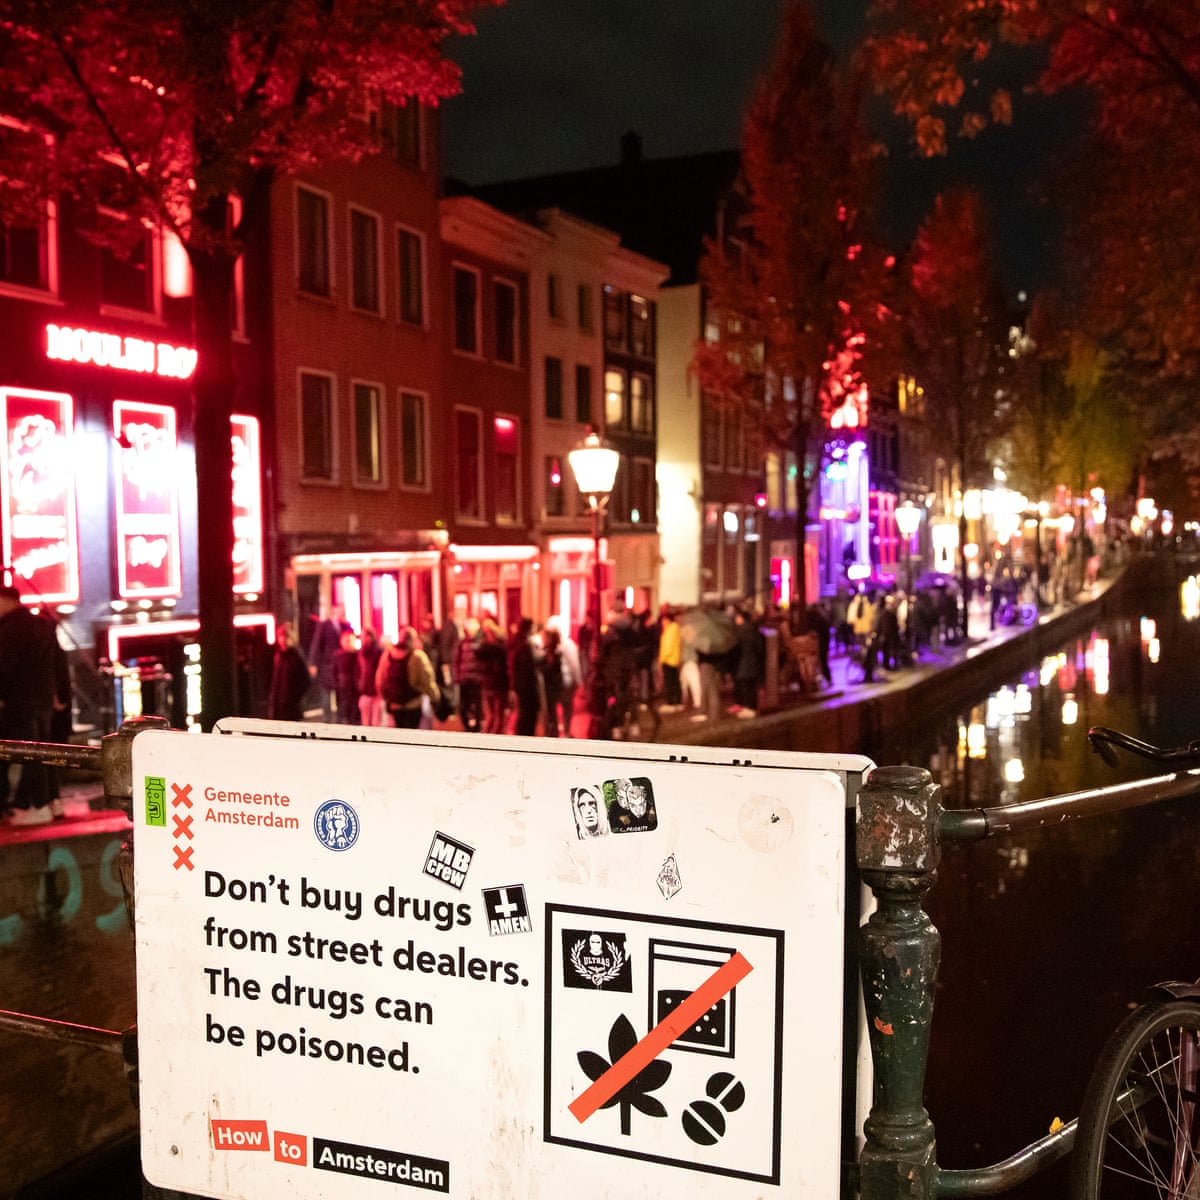 Amsterdam welcomes decline of nuisance tourism after 'stay away' drive, Netherlands